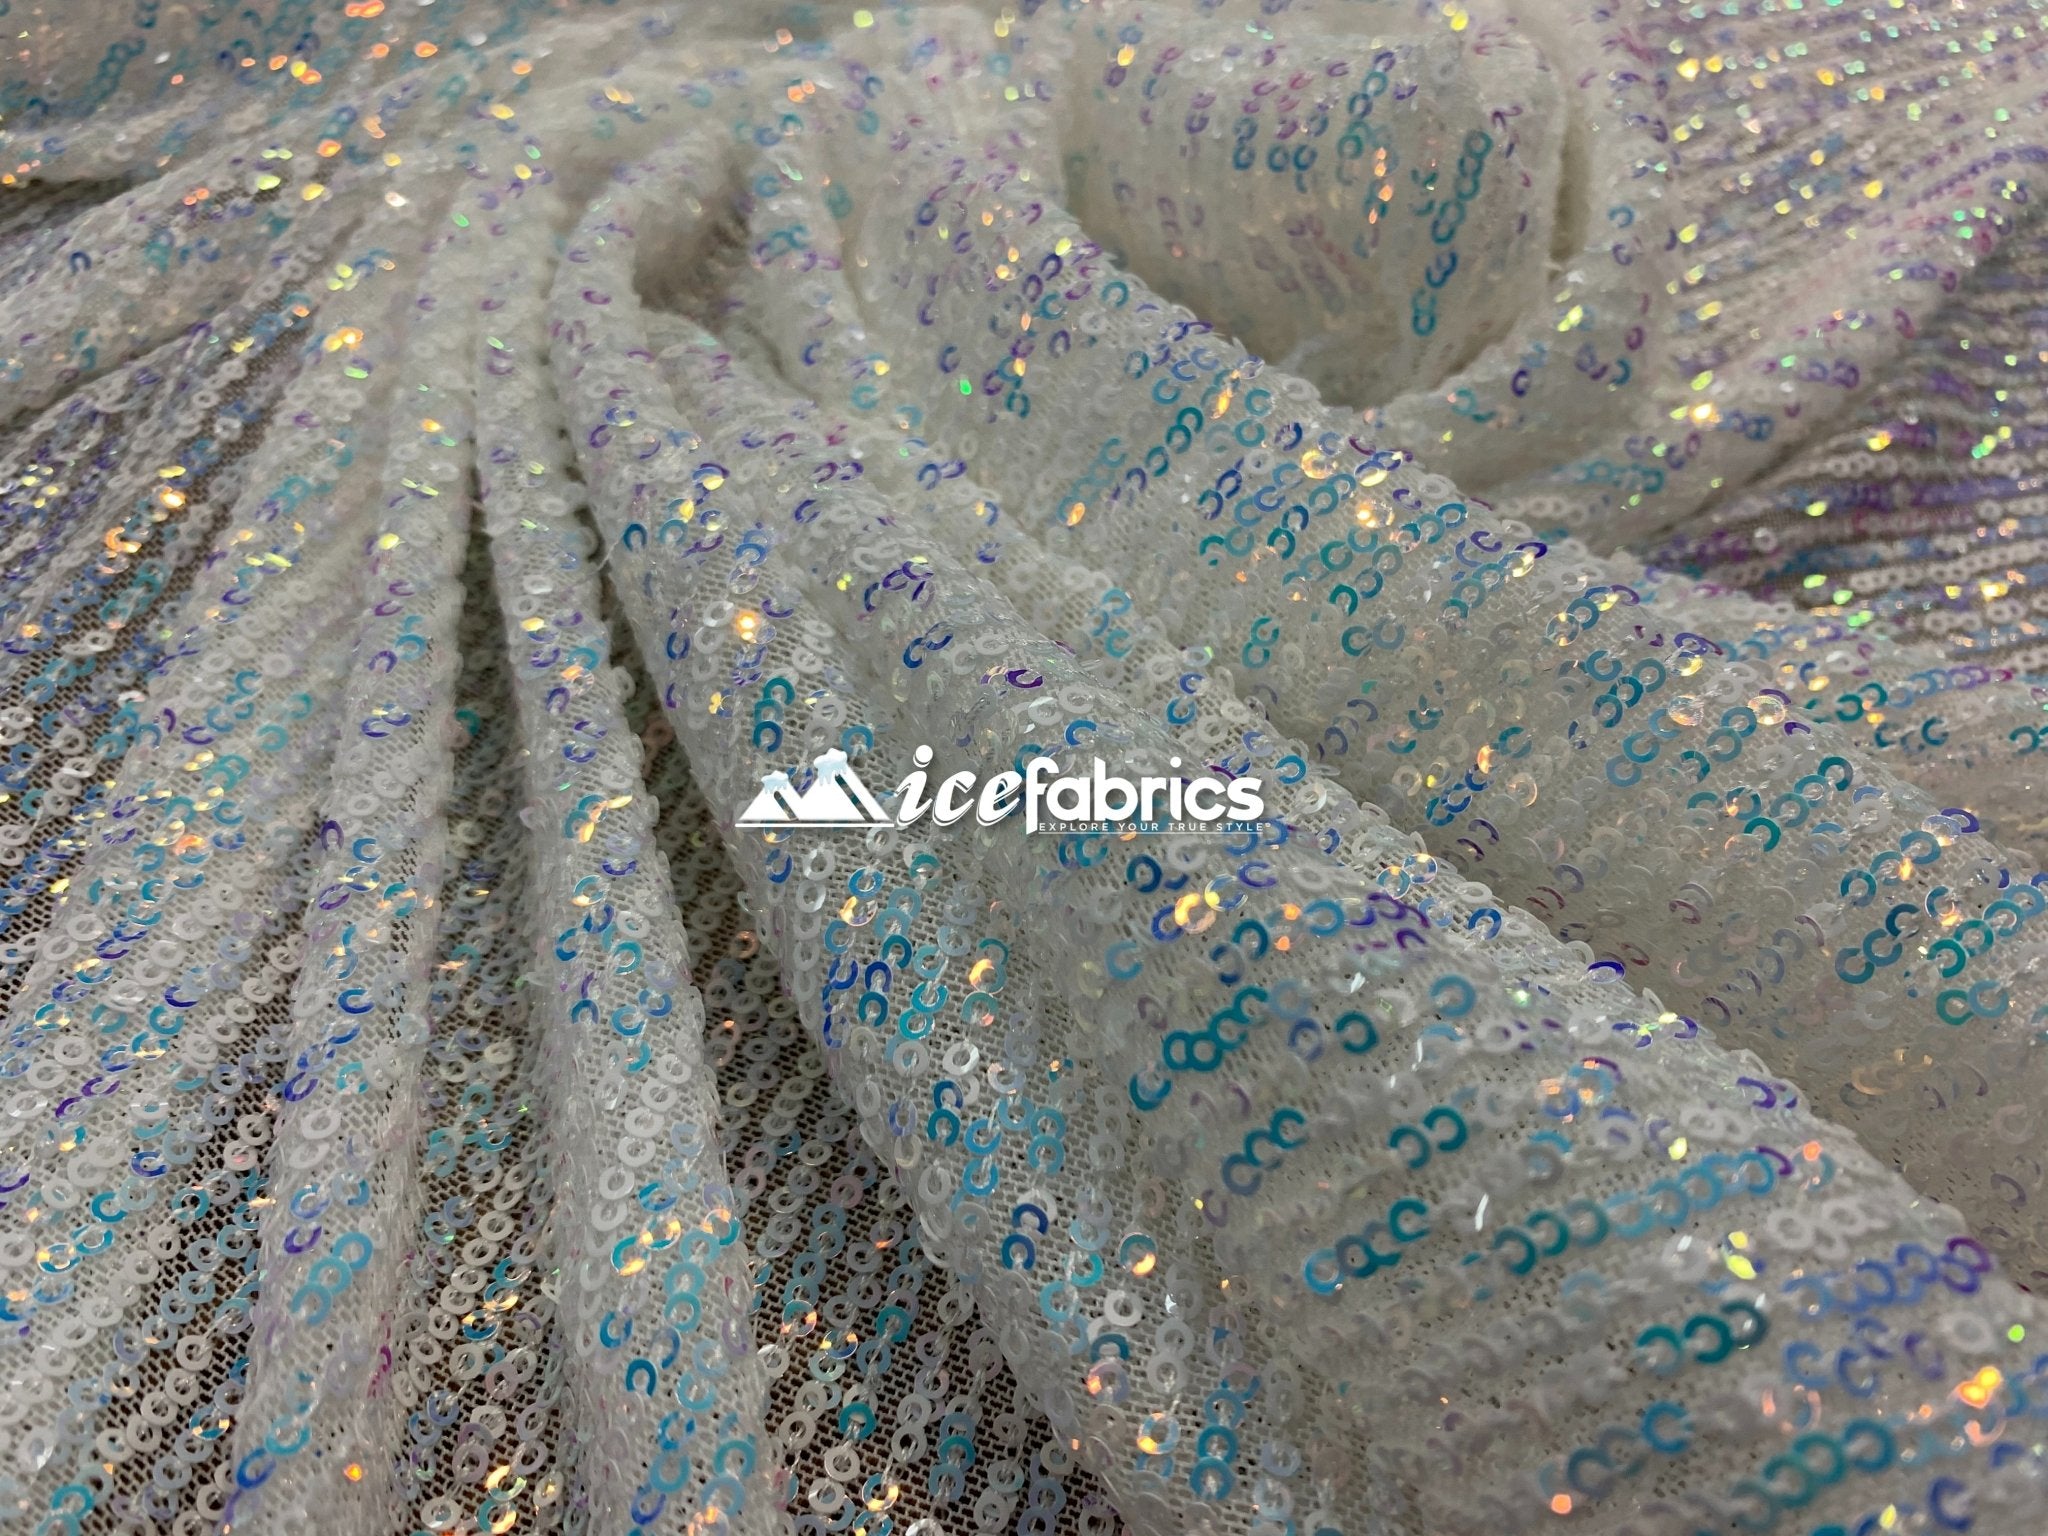 White Blue Iridescent Sequin 2 Way Mesh Stretch Sequins Fabric By The YardICEFABRICICE FABRICSWhite Blue Iridescent Sequin 2 Way Mesh Stretch Sequins Fabric By The Yard ICEFABRIC